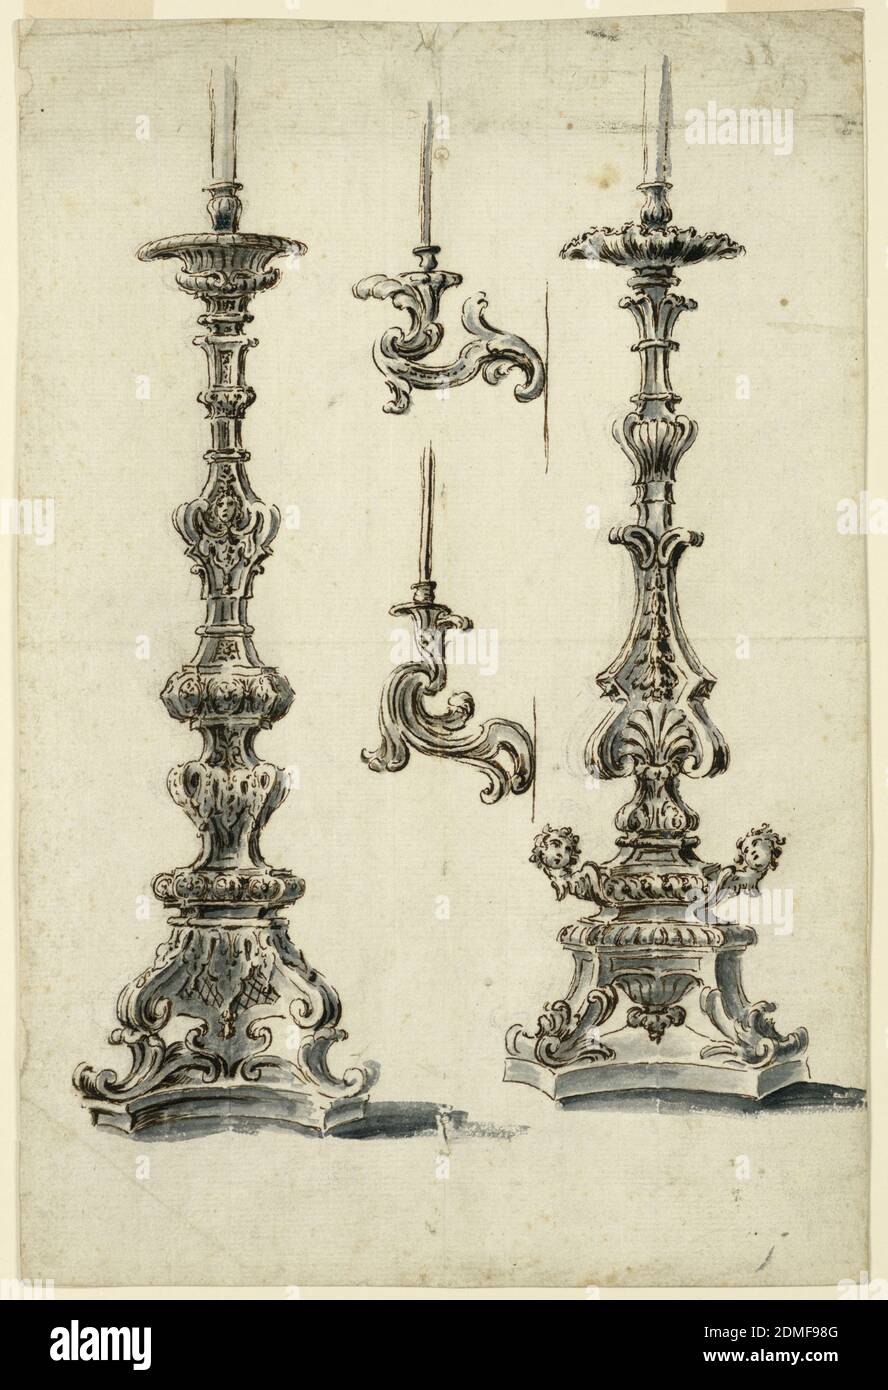 Designs for Altar Candlesticks and Candle Brackets, Pen and ink, brush and gray watercolor, black chalk on paper, Vertical rectangle. At left and right, two candlesticks with hexagonal bases with concave sides, supported by leaf scrolls. In the decorations of the candlestick at left, scallops of a cloth with tassels. A mask is at the upper knob. The candlestick at right has cherubim at the oblique sides of the upper section of the pedestal. The bowl below its socket has the shape of a shell. The brackets, either for one candle, are in the center. They are drawn in a vertical row, in profile Stock Photo